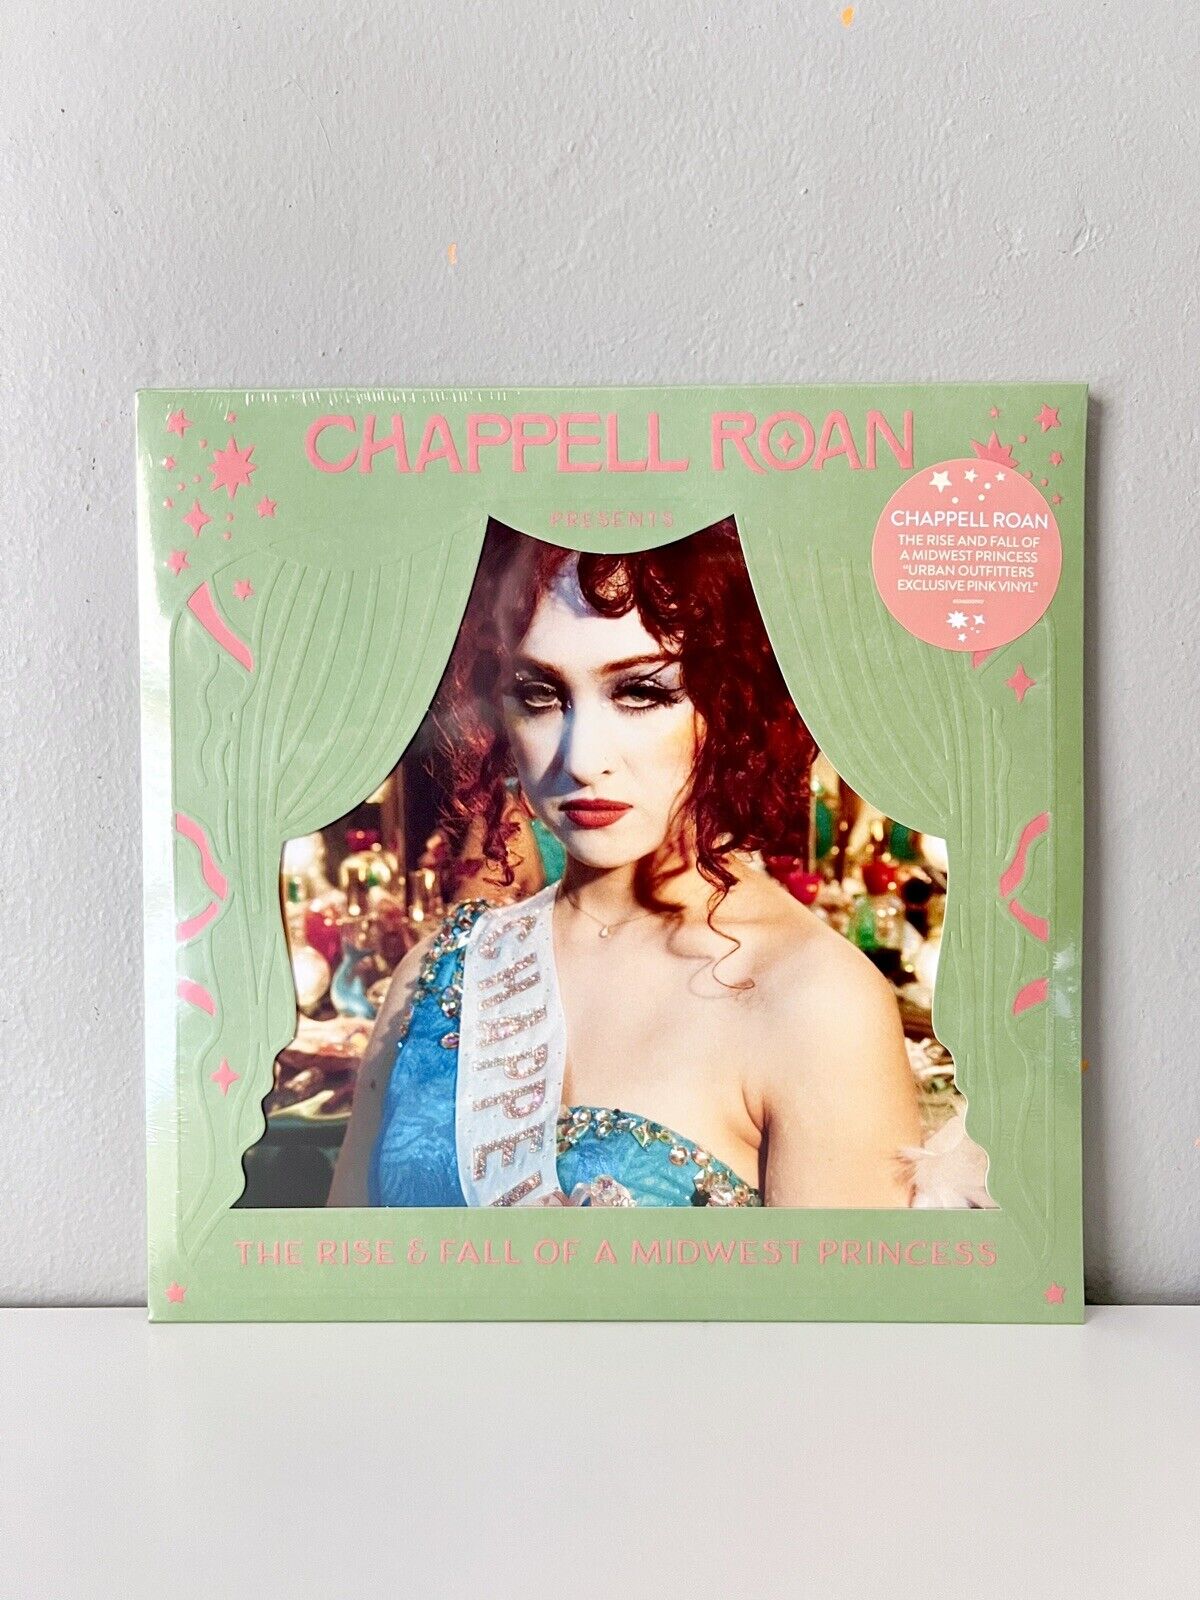 Chappell Roan The Rise And Fall Of A Midwest Princess UO Pink Vinyl